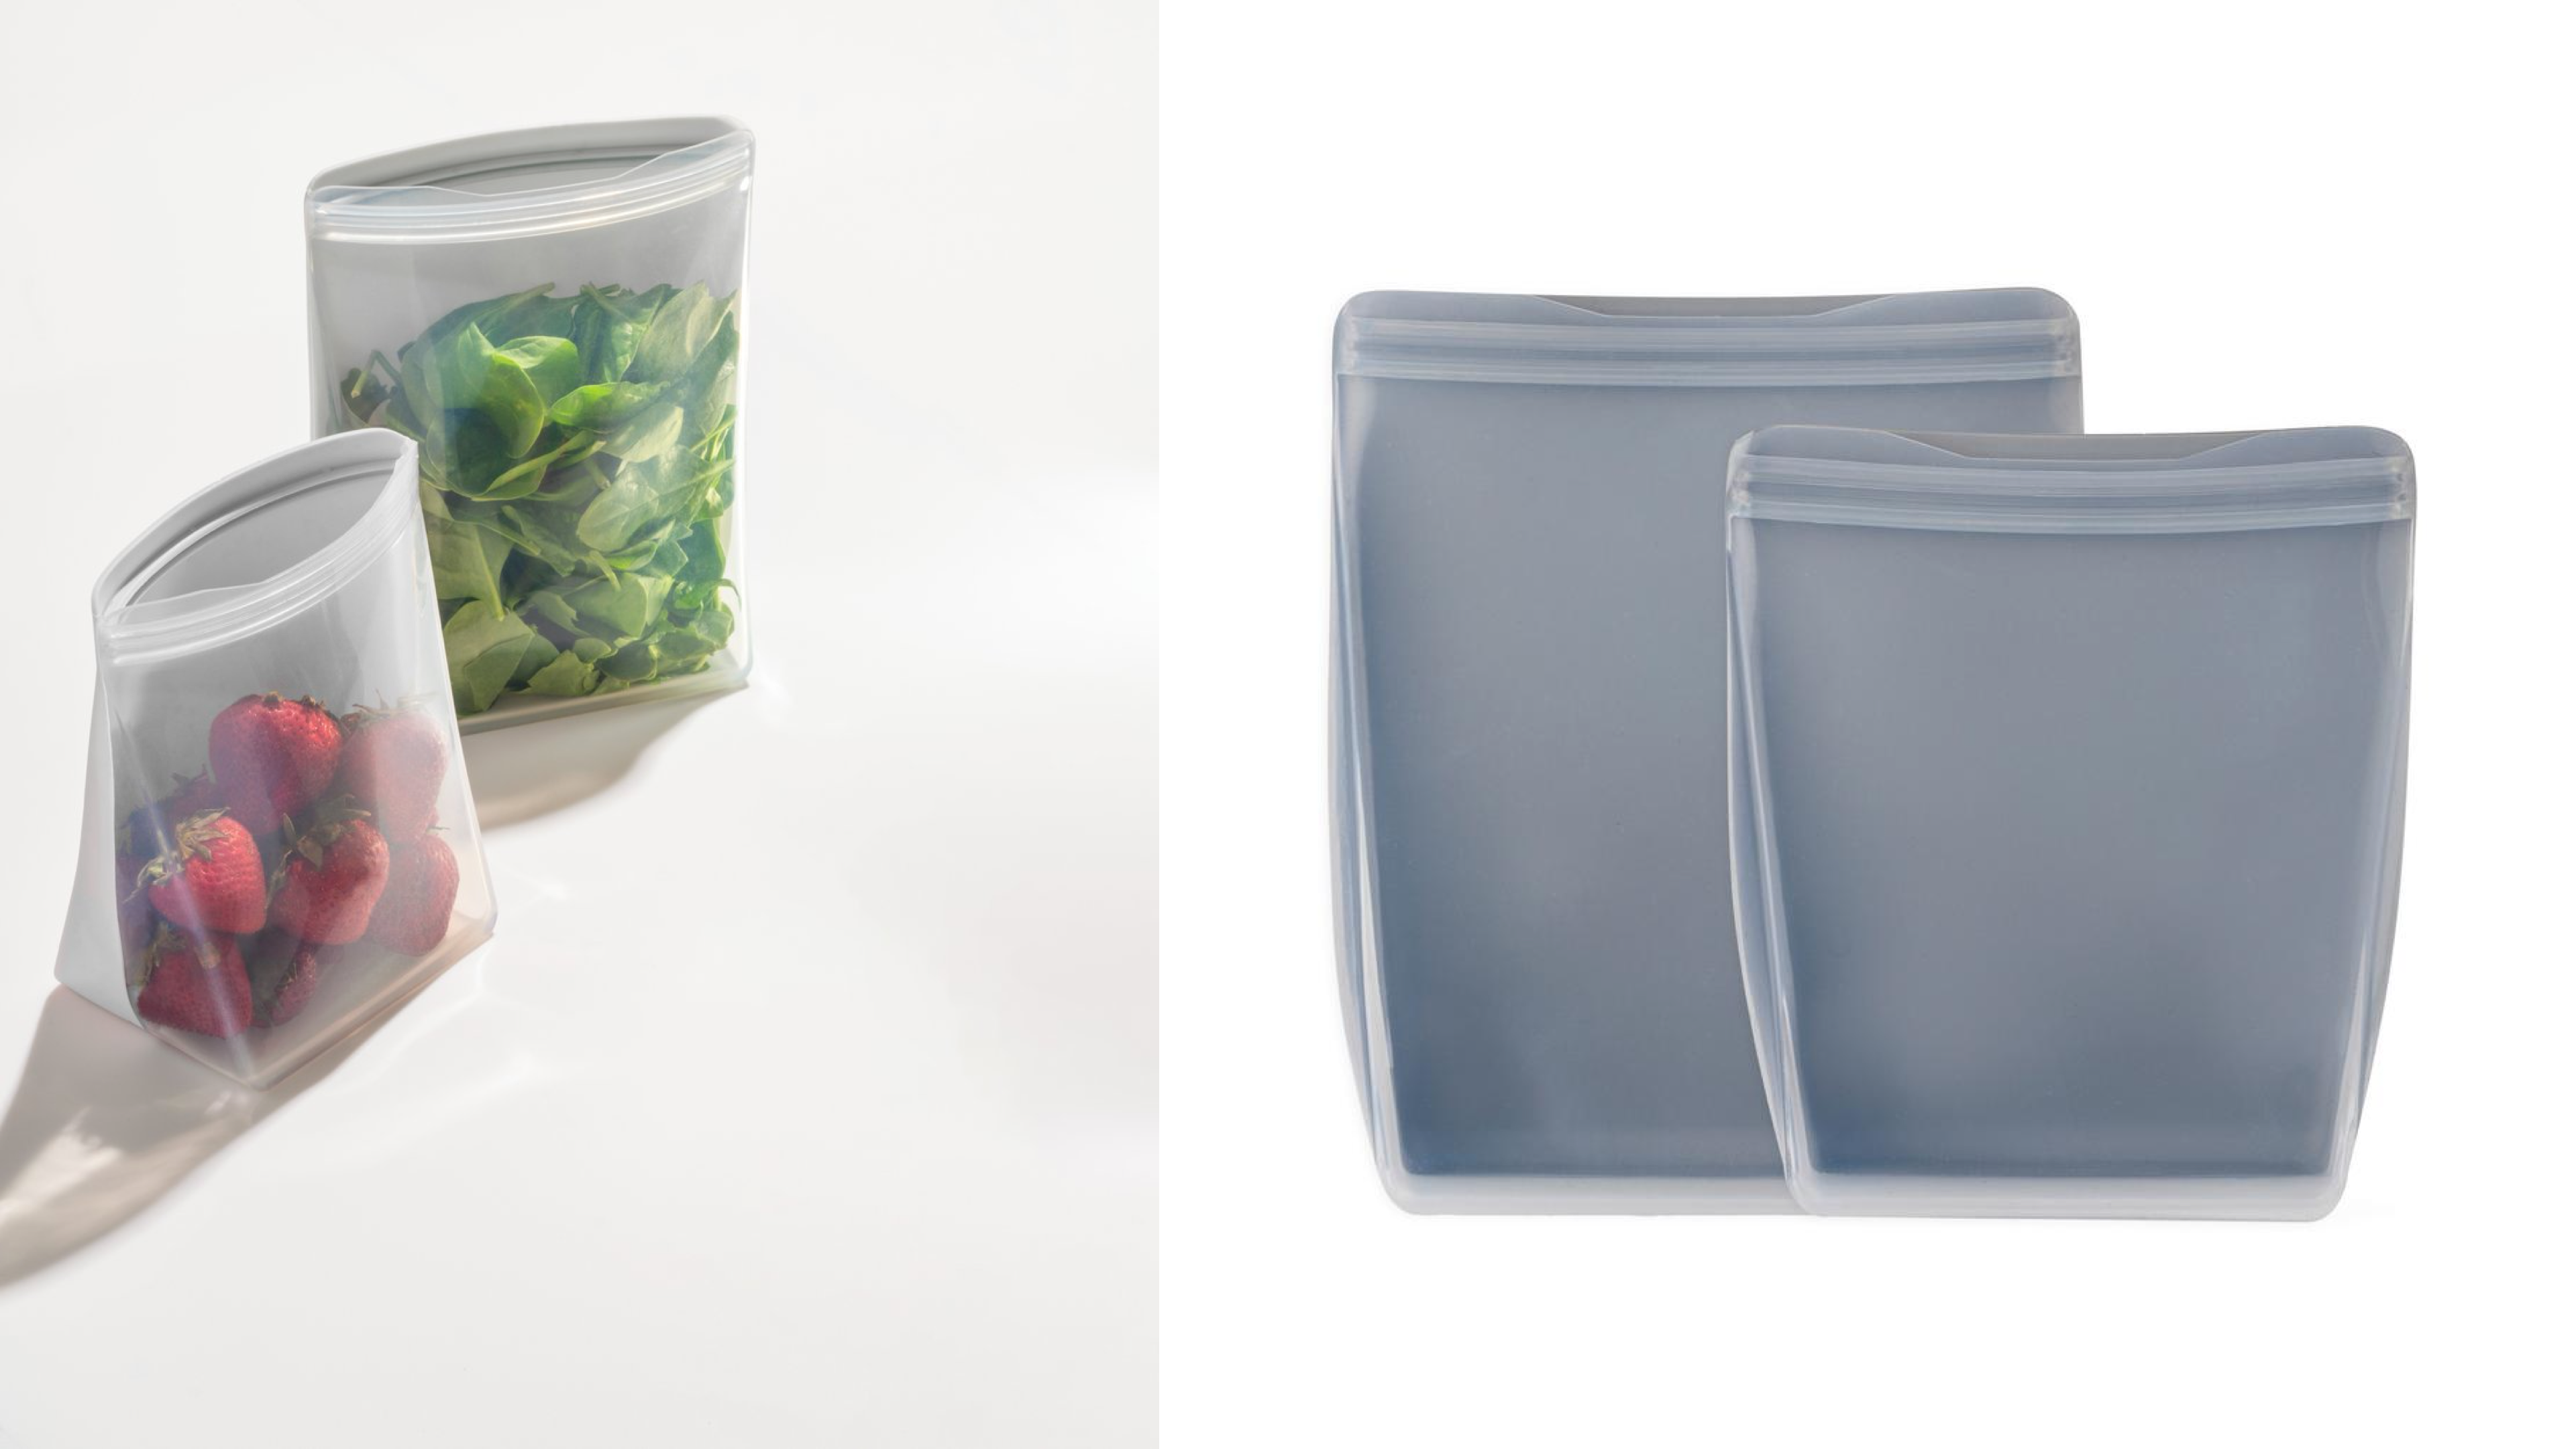 reusable silicone stand-up bags to store leftovers